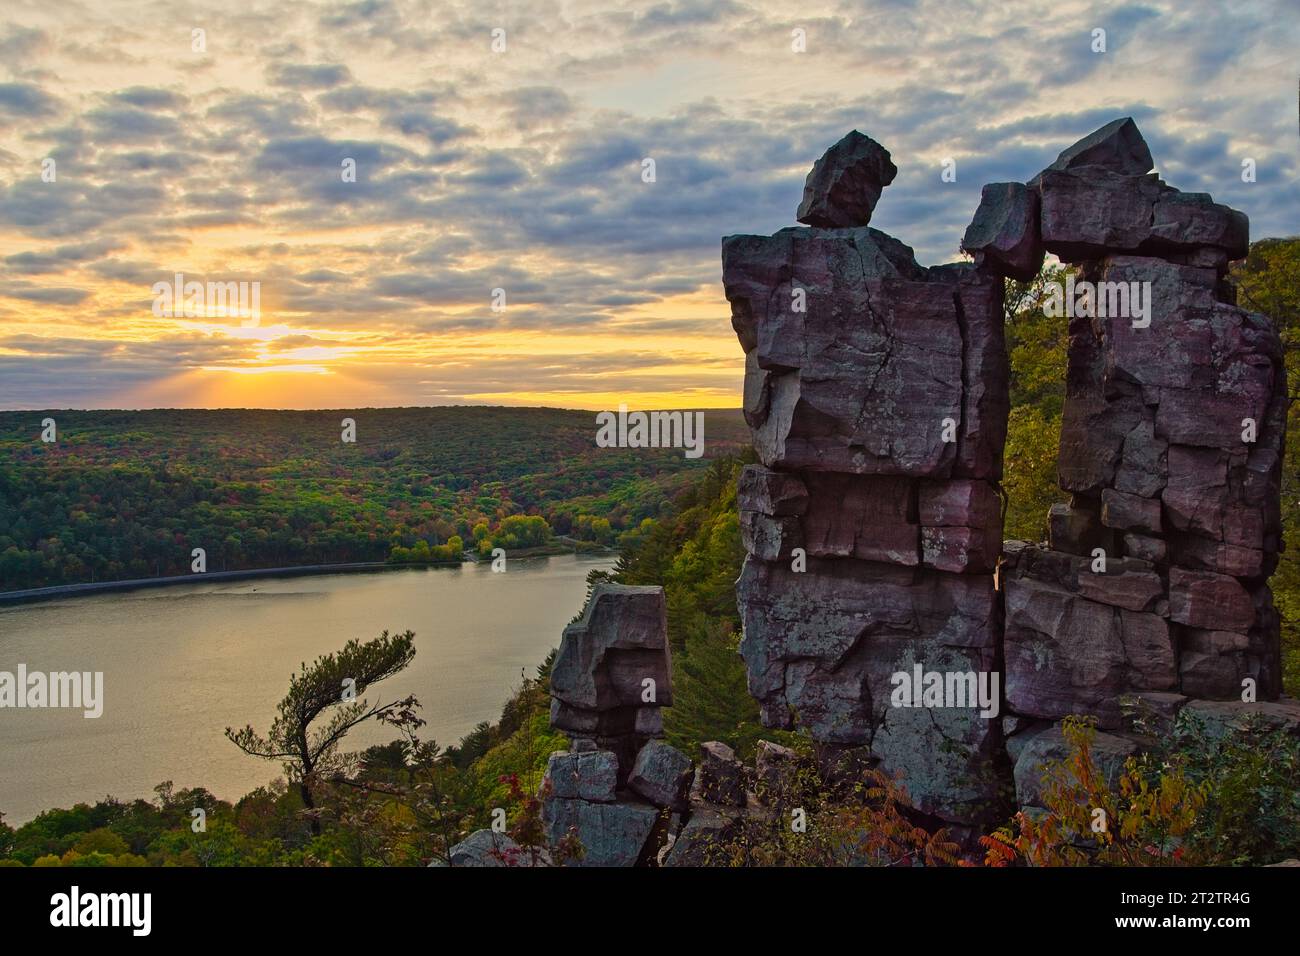 Devil's Lake State Park in Wisconsin, is known for it's scenic hike along rocky paths and bluffs with interesting rock formations. Stock Photo